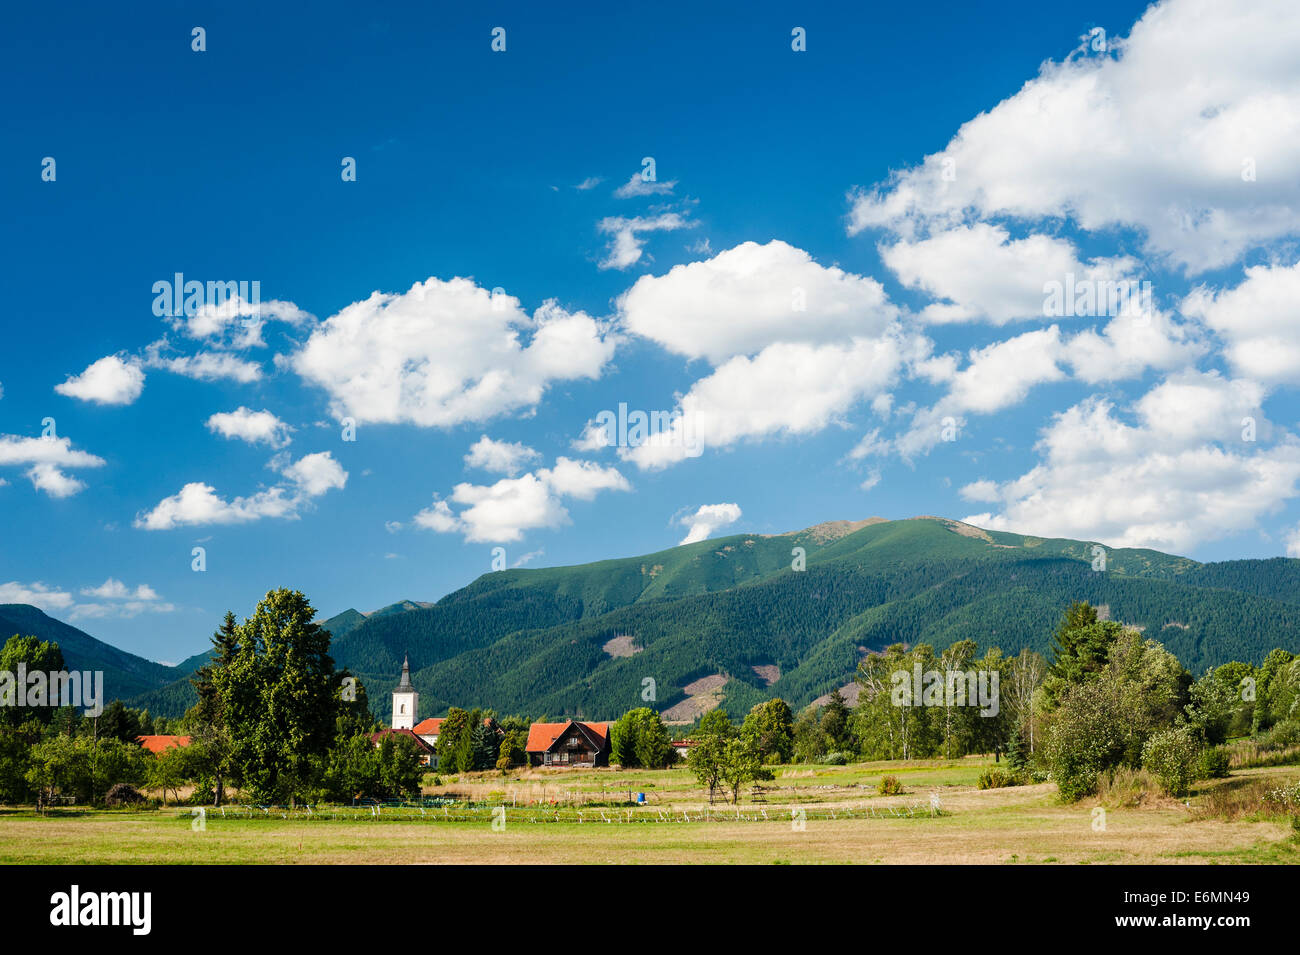 A village under mountains in summer country Stock Photo